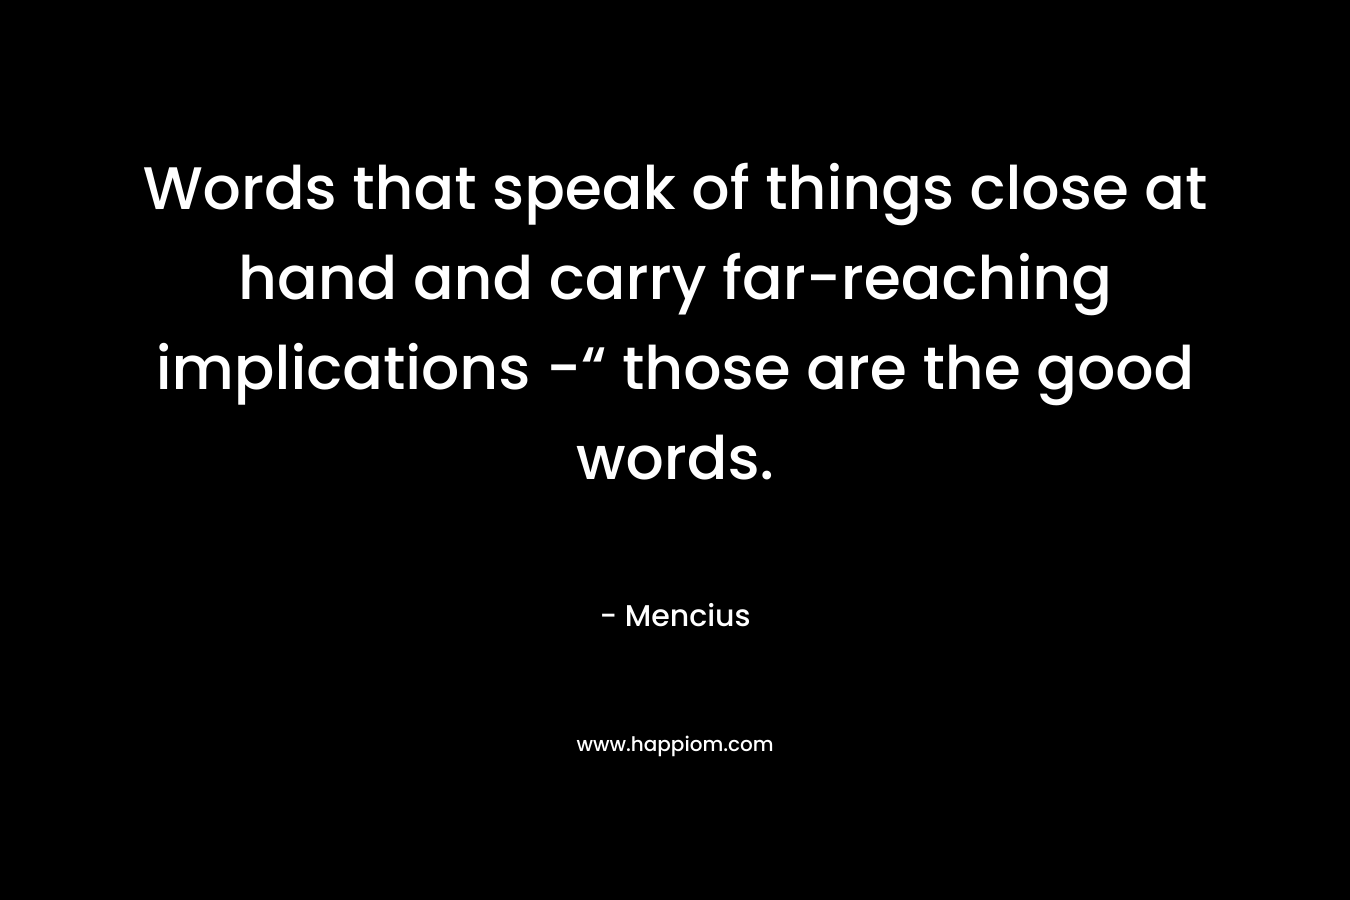 Words that speak of things close at hand and carry far-reaching implications -“ those are the good words.